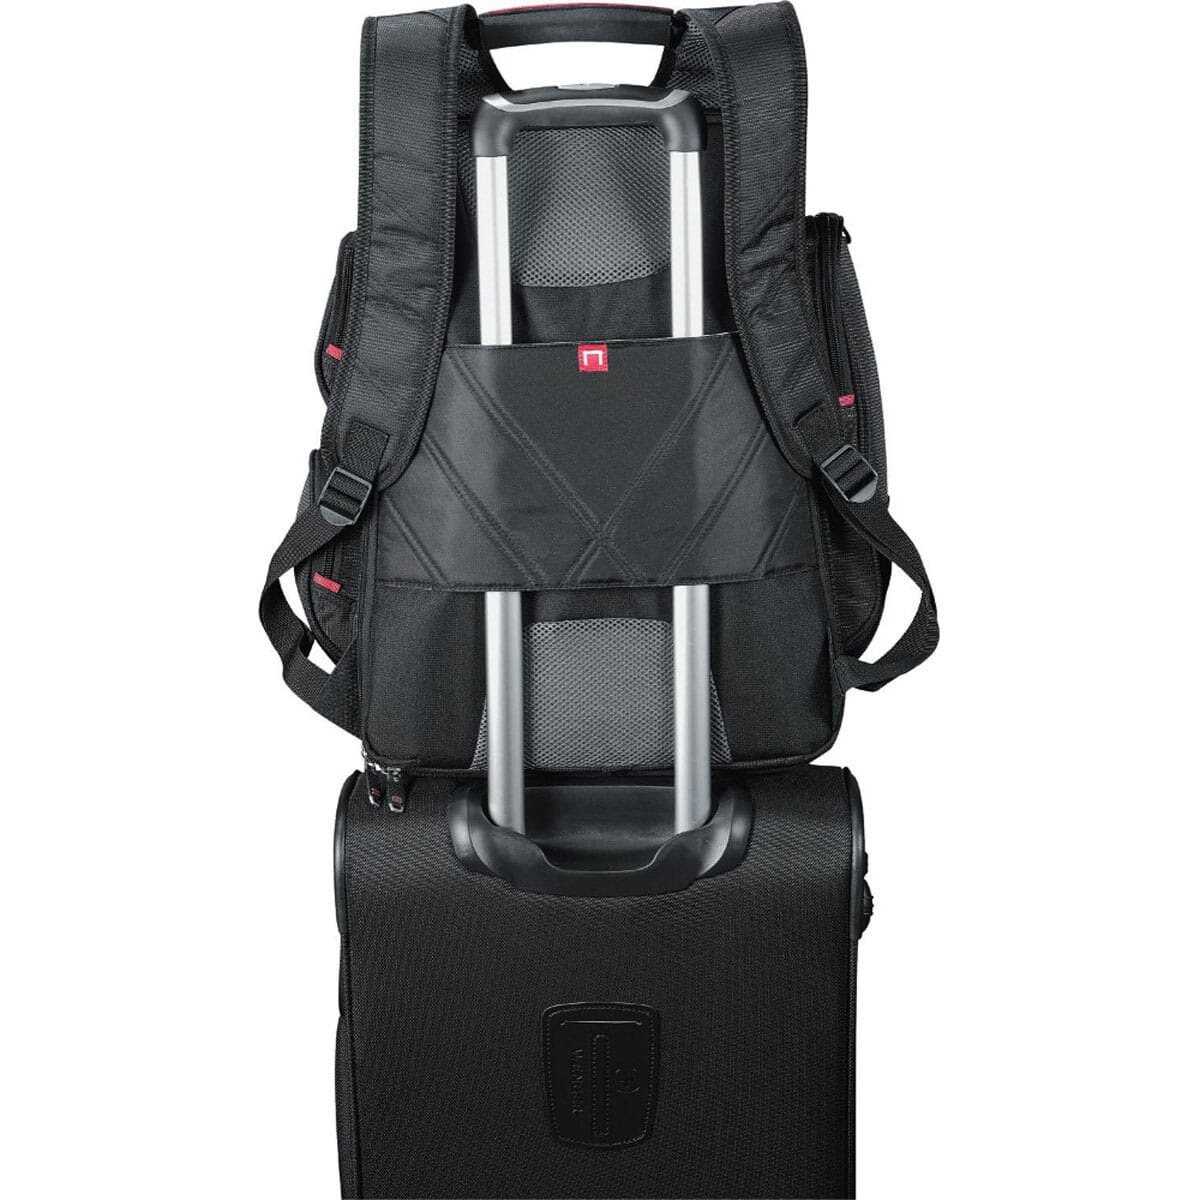 Elleven™ Checkpoint-Friendly Compu-Backpack - Promotional Giveaway